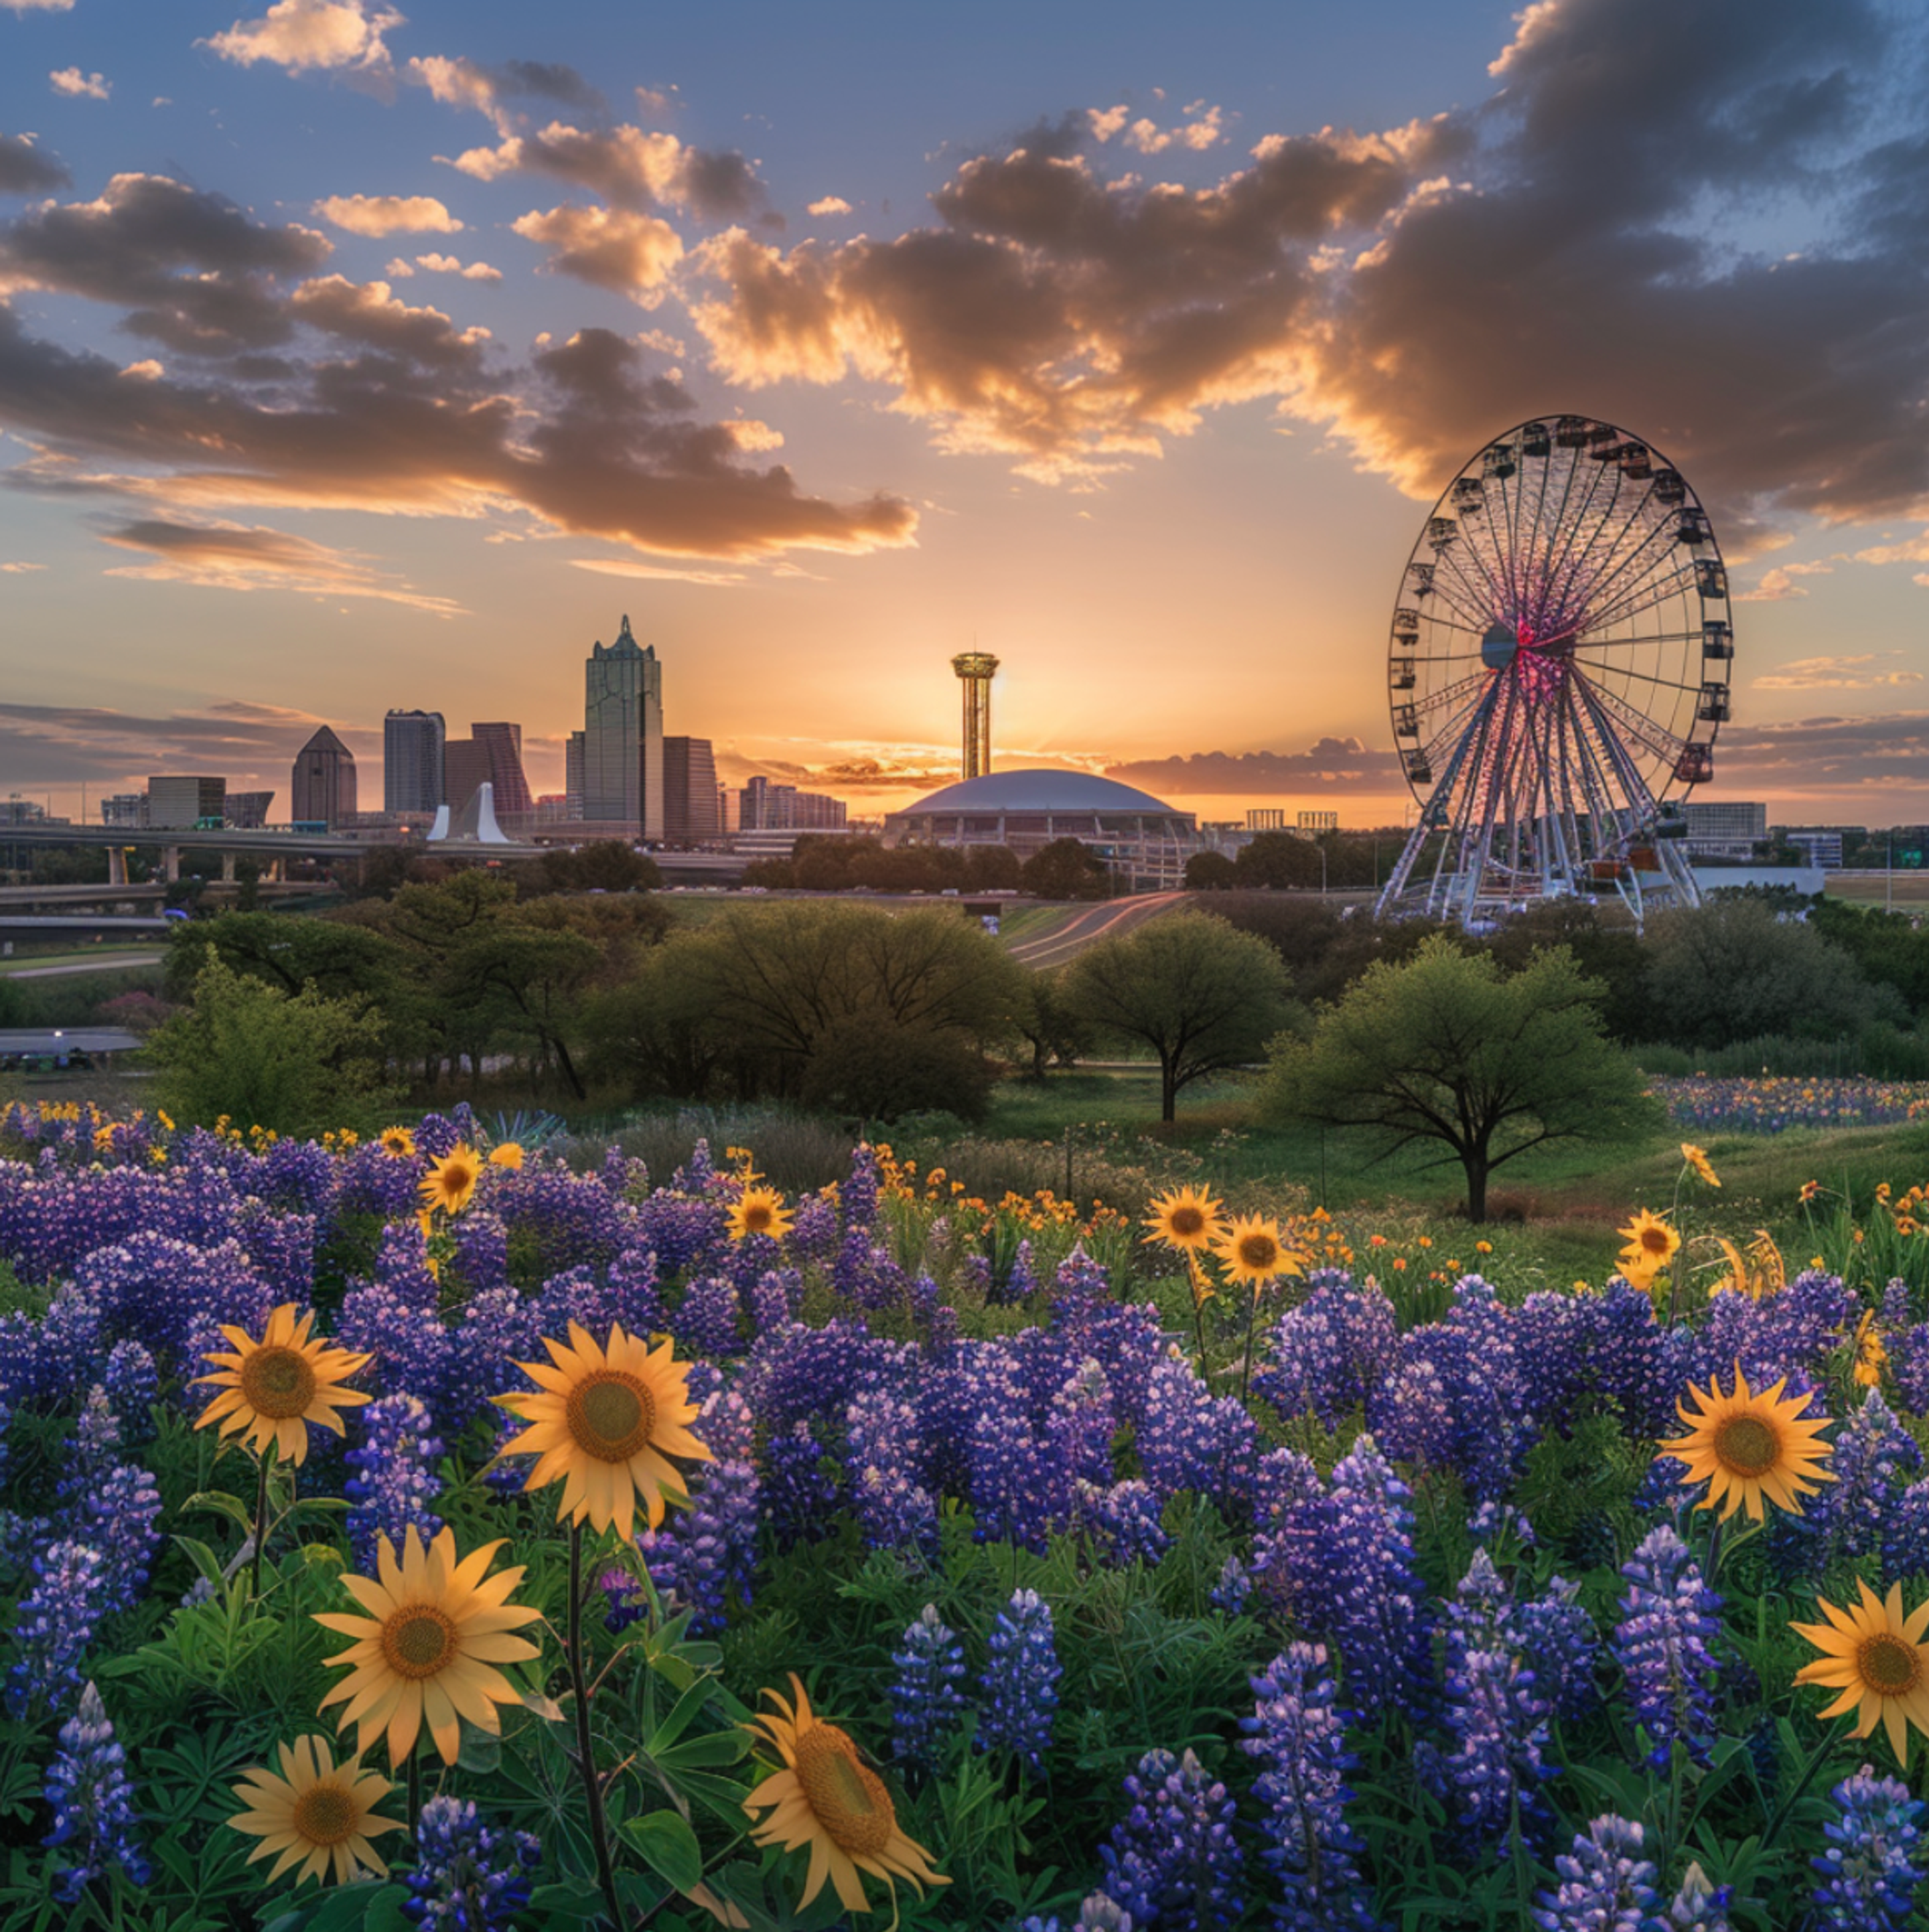 Sunset over Arlington, Texas, with a stunning display of native wildflowers including bluebonnets and sunflowers in the foreground, the iconic Ferris wheel and observation tower silhouetted against the colorful sky, showcasing the city's vibrant community spaces and attractions.